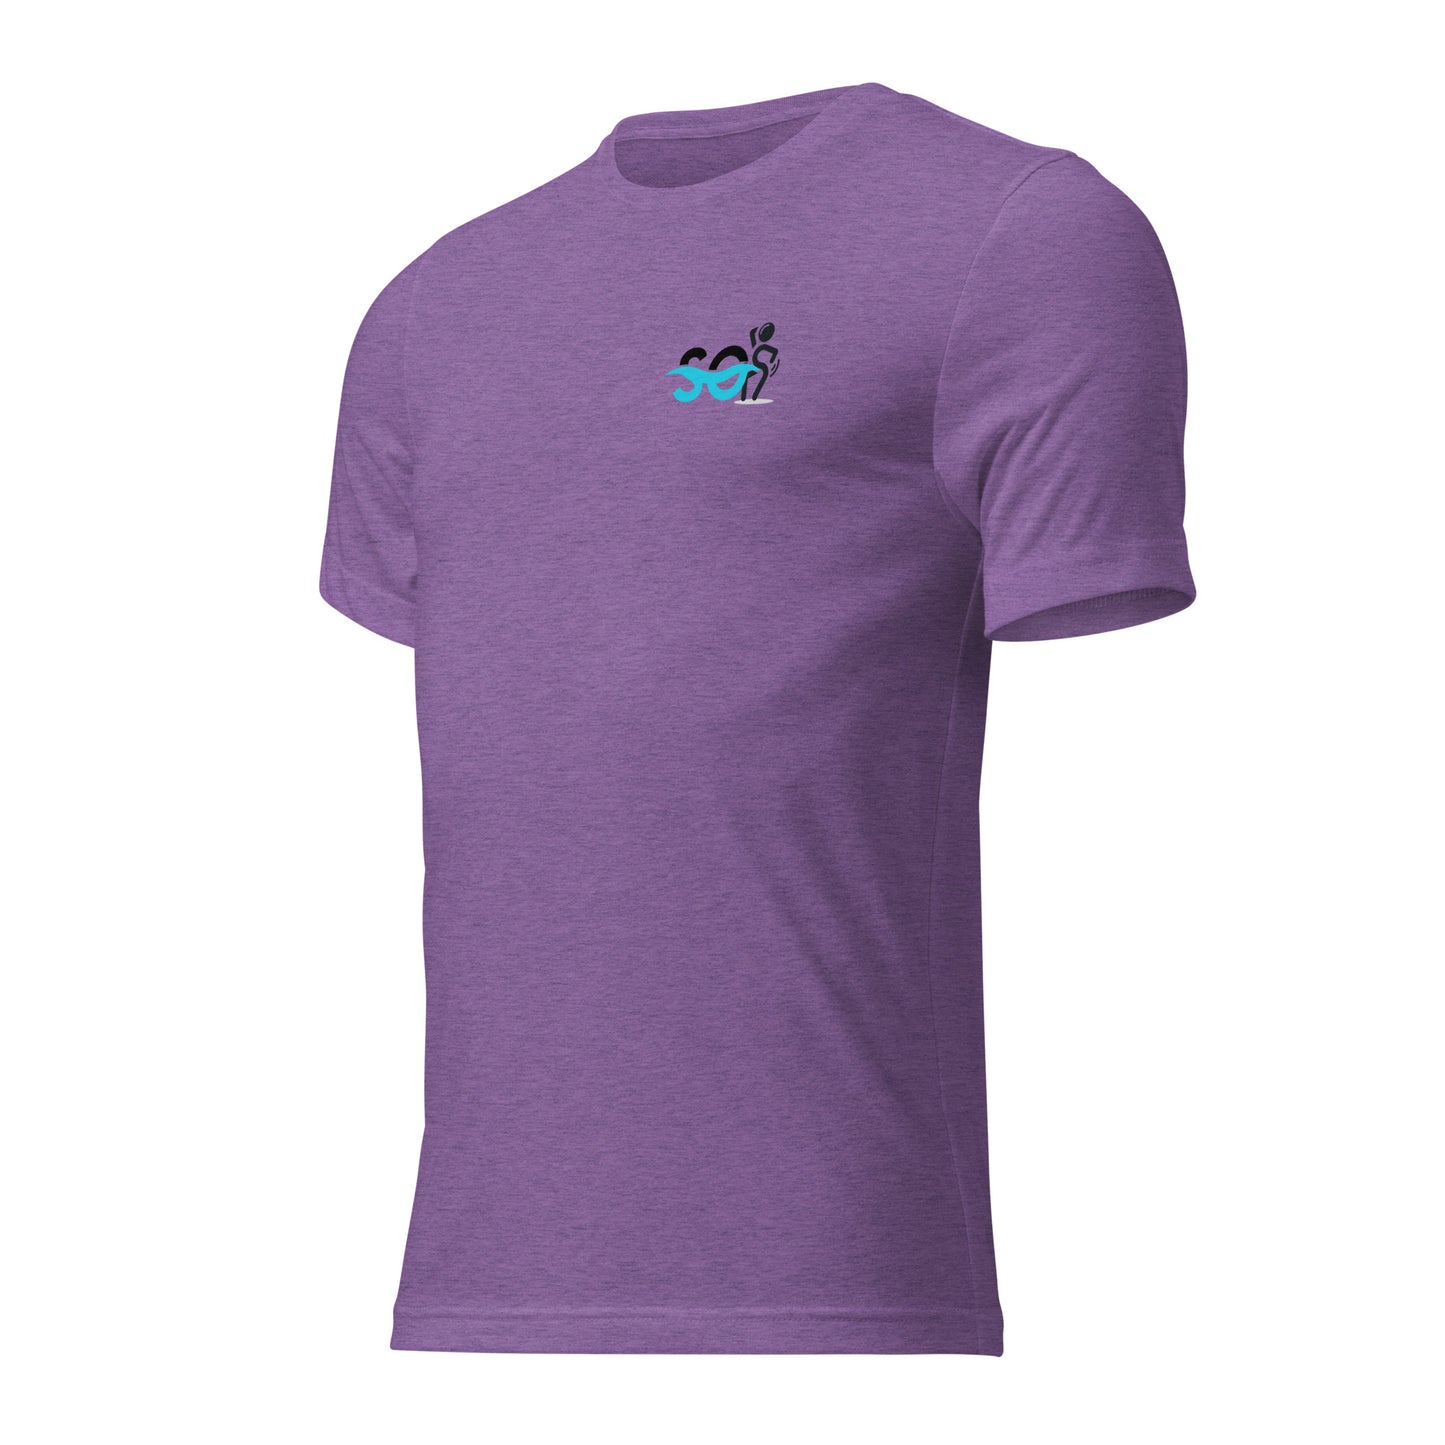 a purple t - shirt with a small blue bird on it